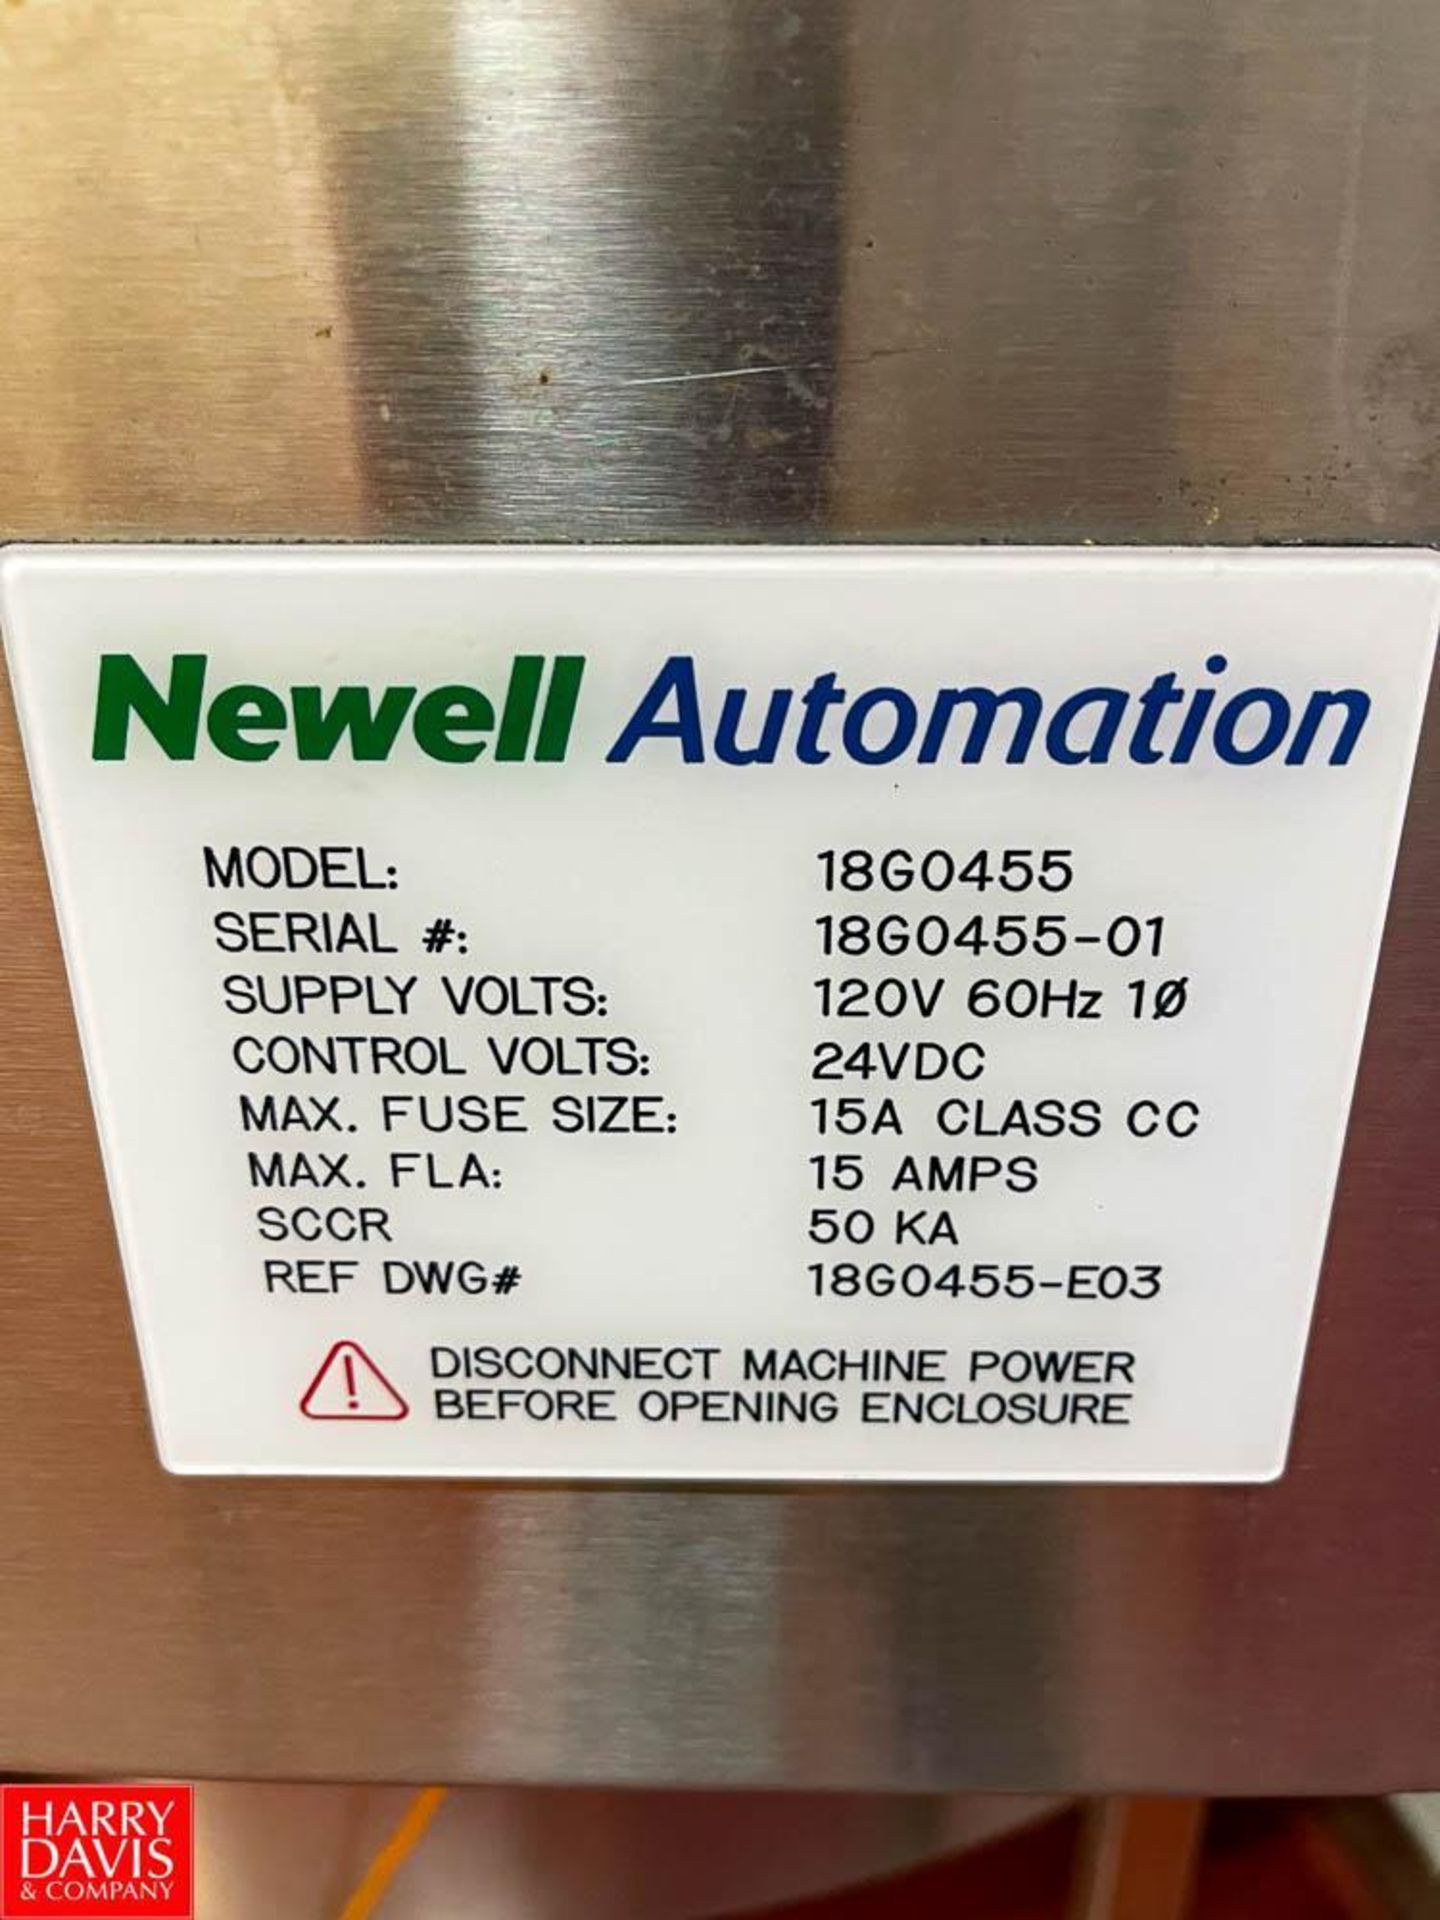 Newell Automation Control Panel, Model: 18G0455, S/N: 18G0455-01, with Allen Bradley Compact Logix 5 - Image 3 of 3